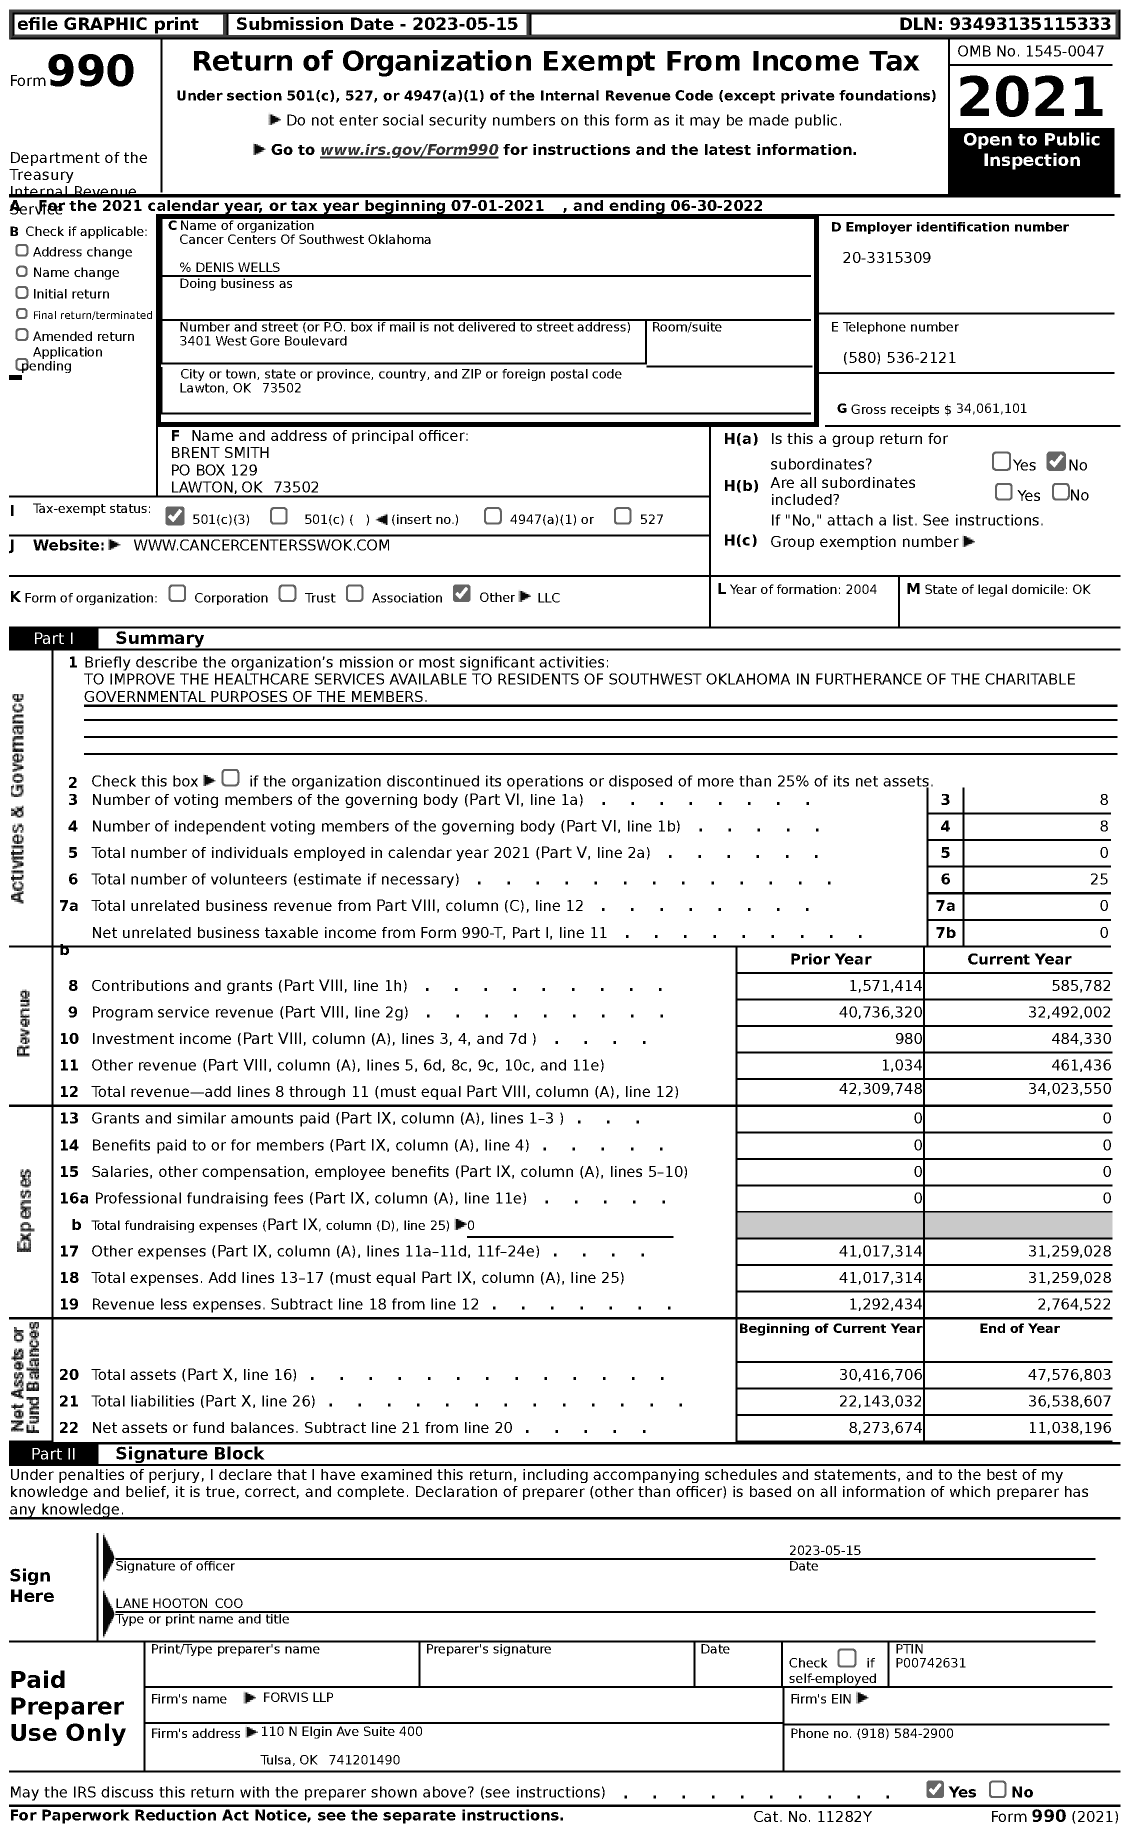 Image of first page of 2021 Form 990 for Cancer Centers of Southwest Oklahoma